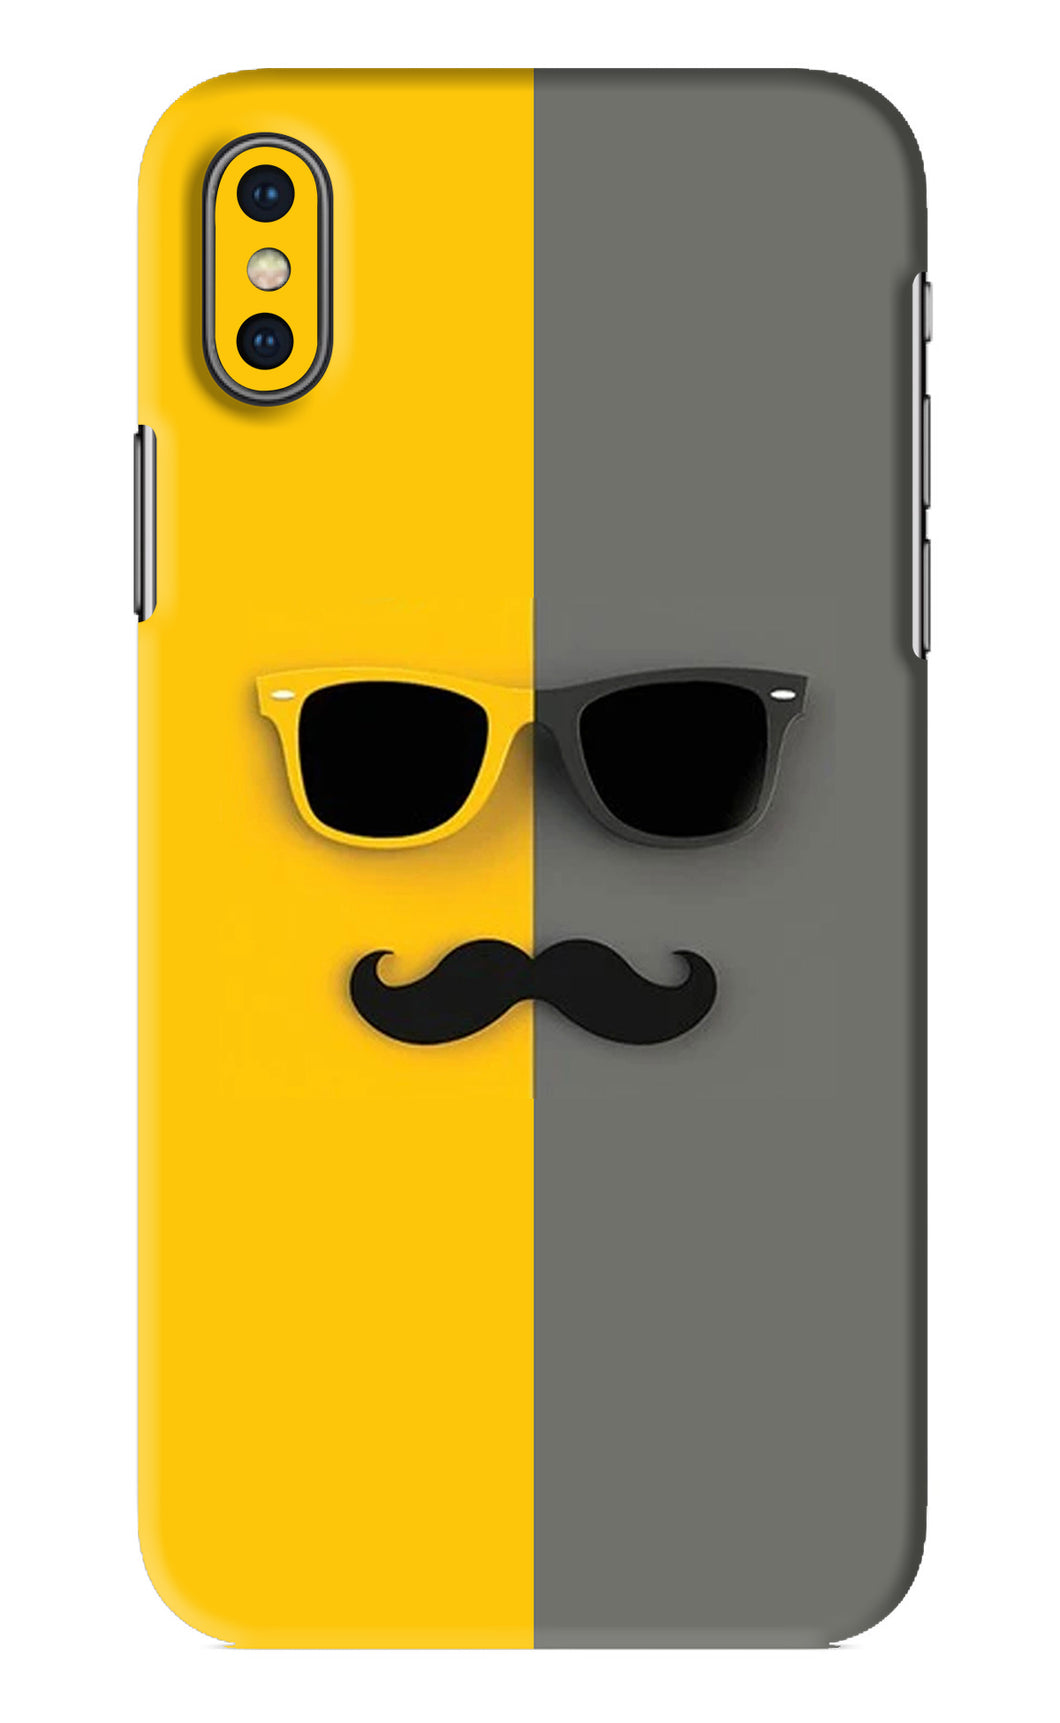 Sunglasses with Mustache iPhone X Back Skin Wrap